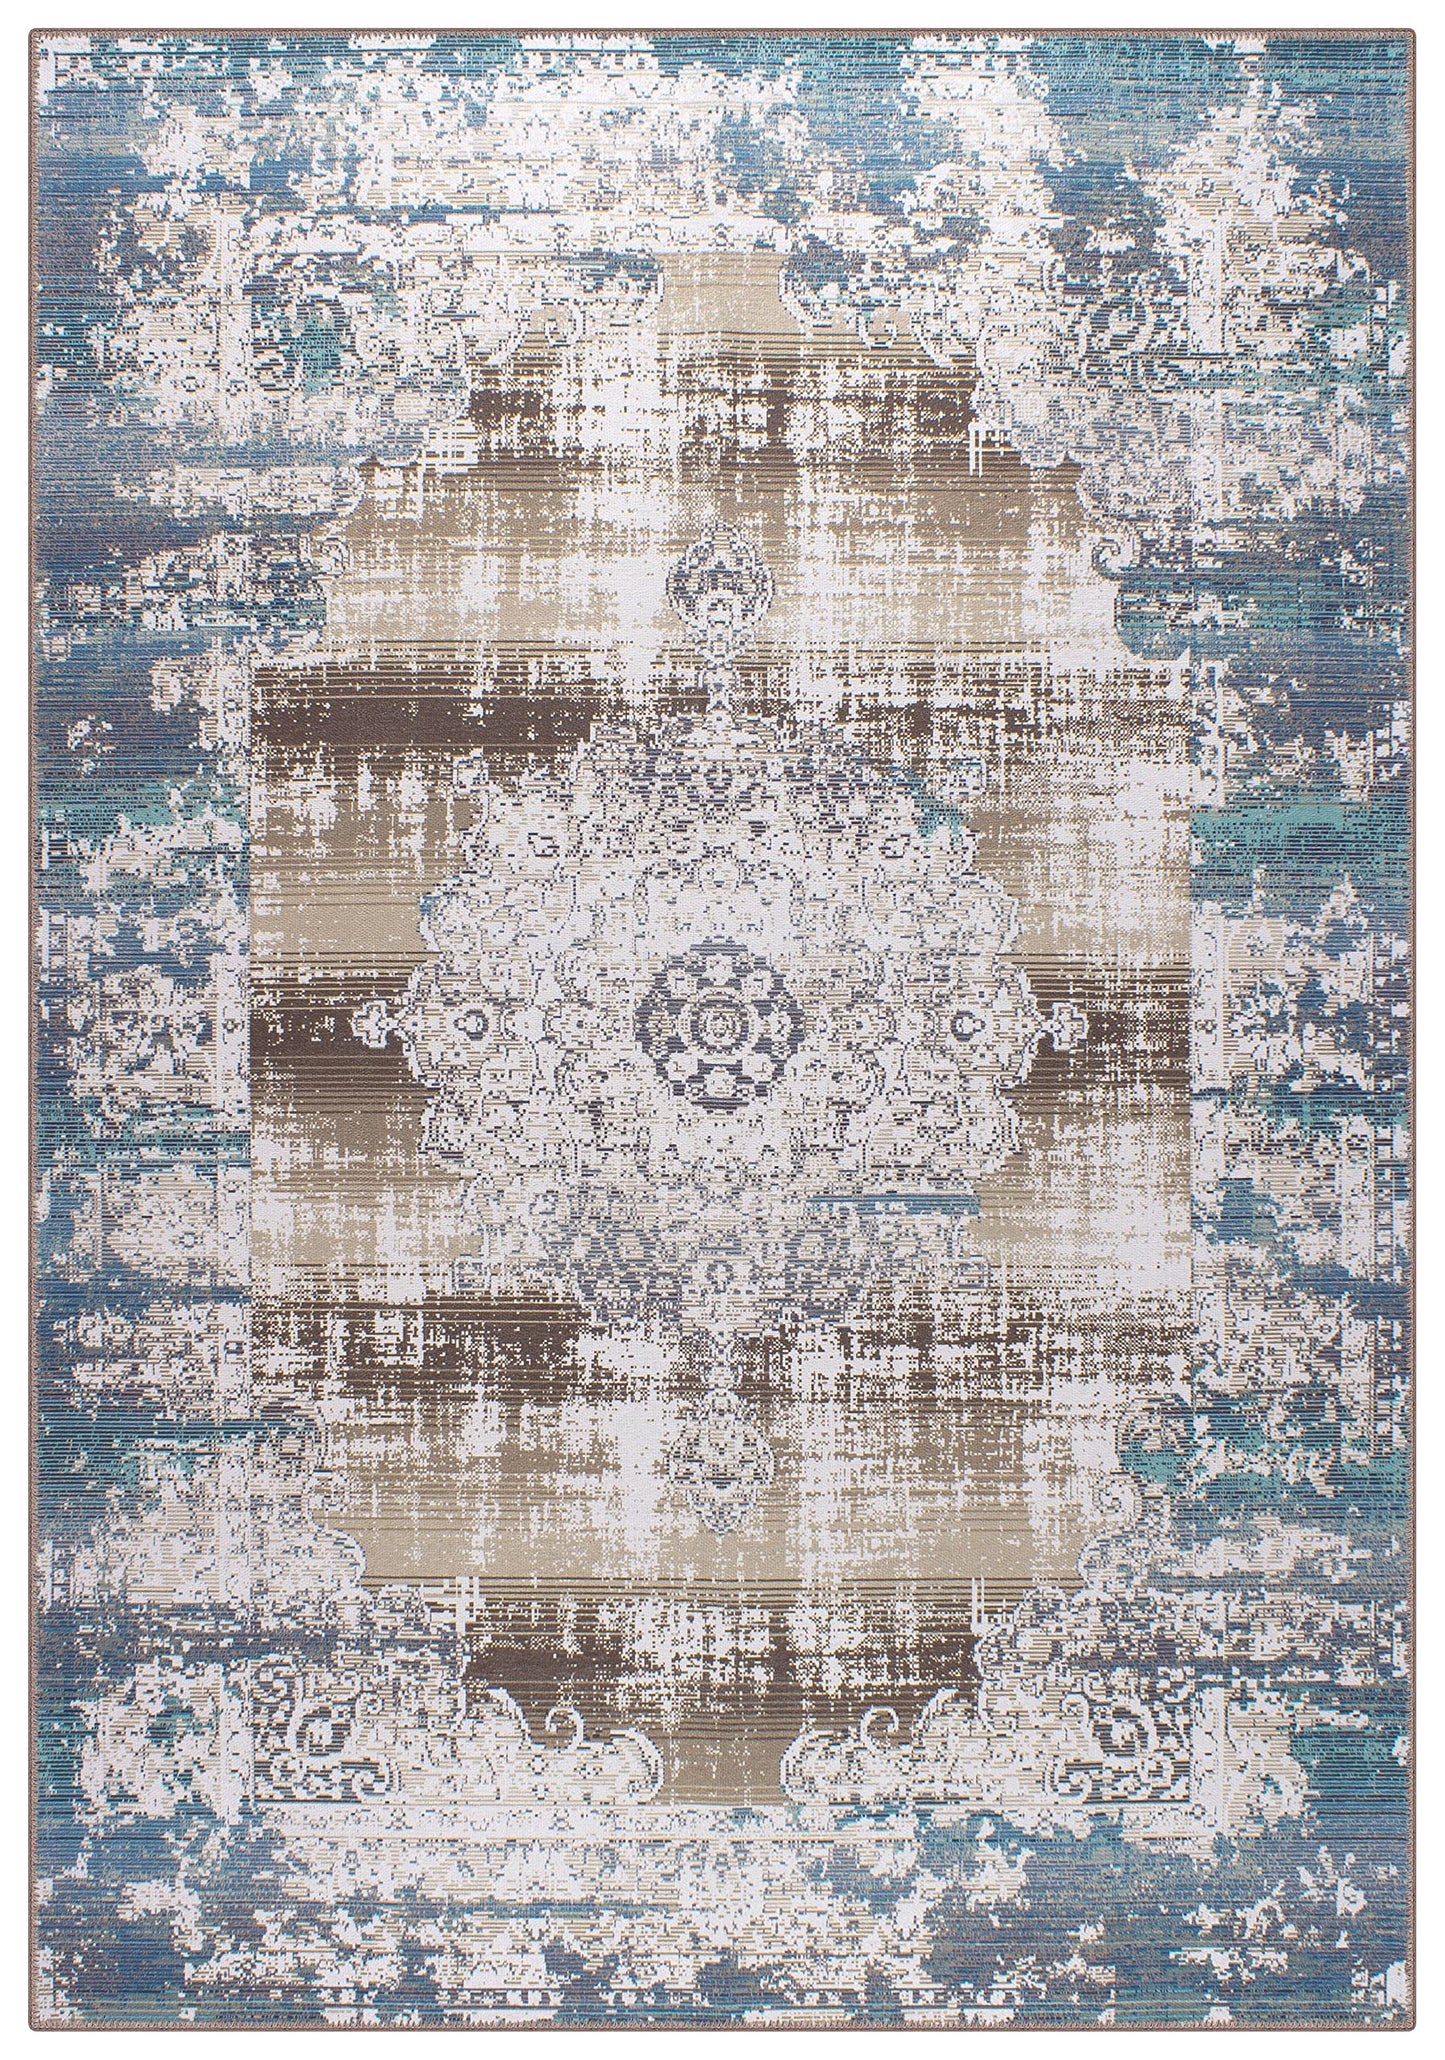 GLN Rugs Machine Washable Area Rug, Rugs for Living Room, Rugs for Bedroom, Bathroom Rug, Kitchen Rug, Printed Vintage Rug, Home Decor Traditional Carpet (Green/Brown, 3' x 5'2")